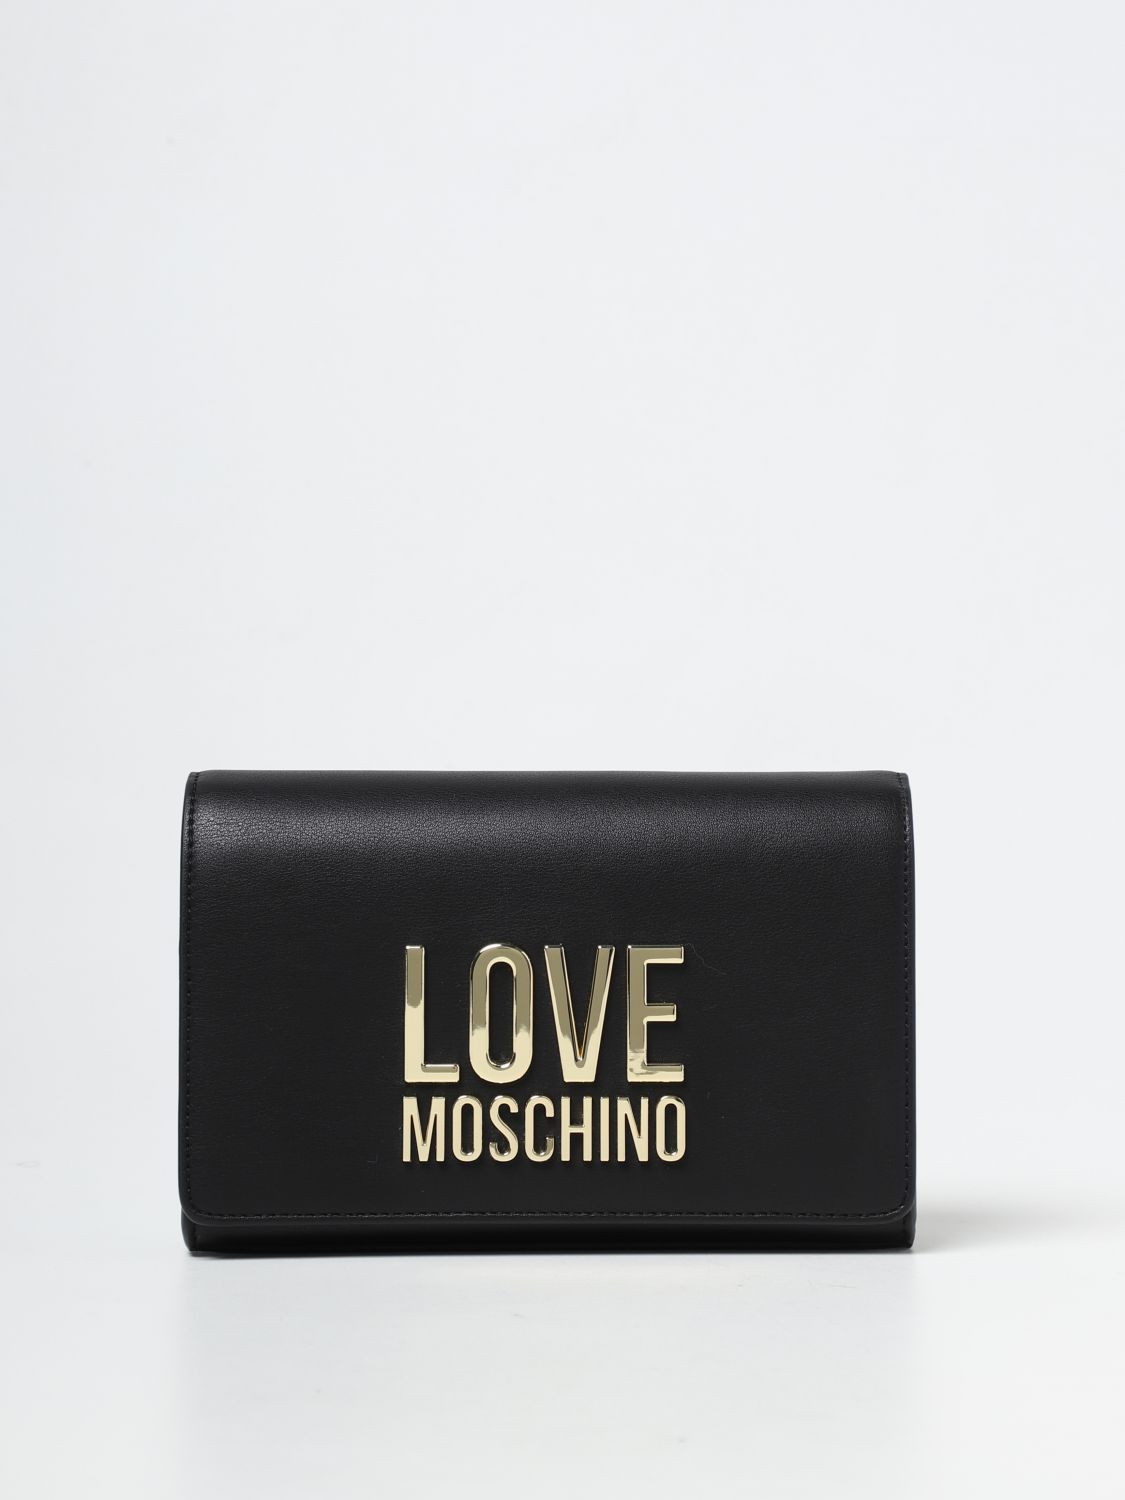 LOVE MOSCHINO: bag in synthetic leather - Black | Love Moschino mini ...